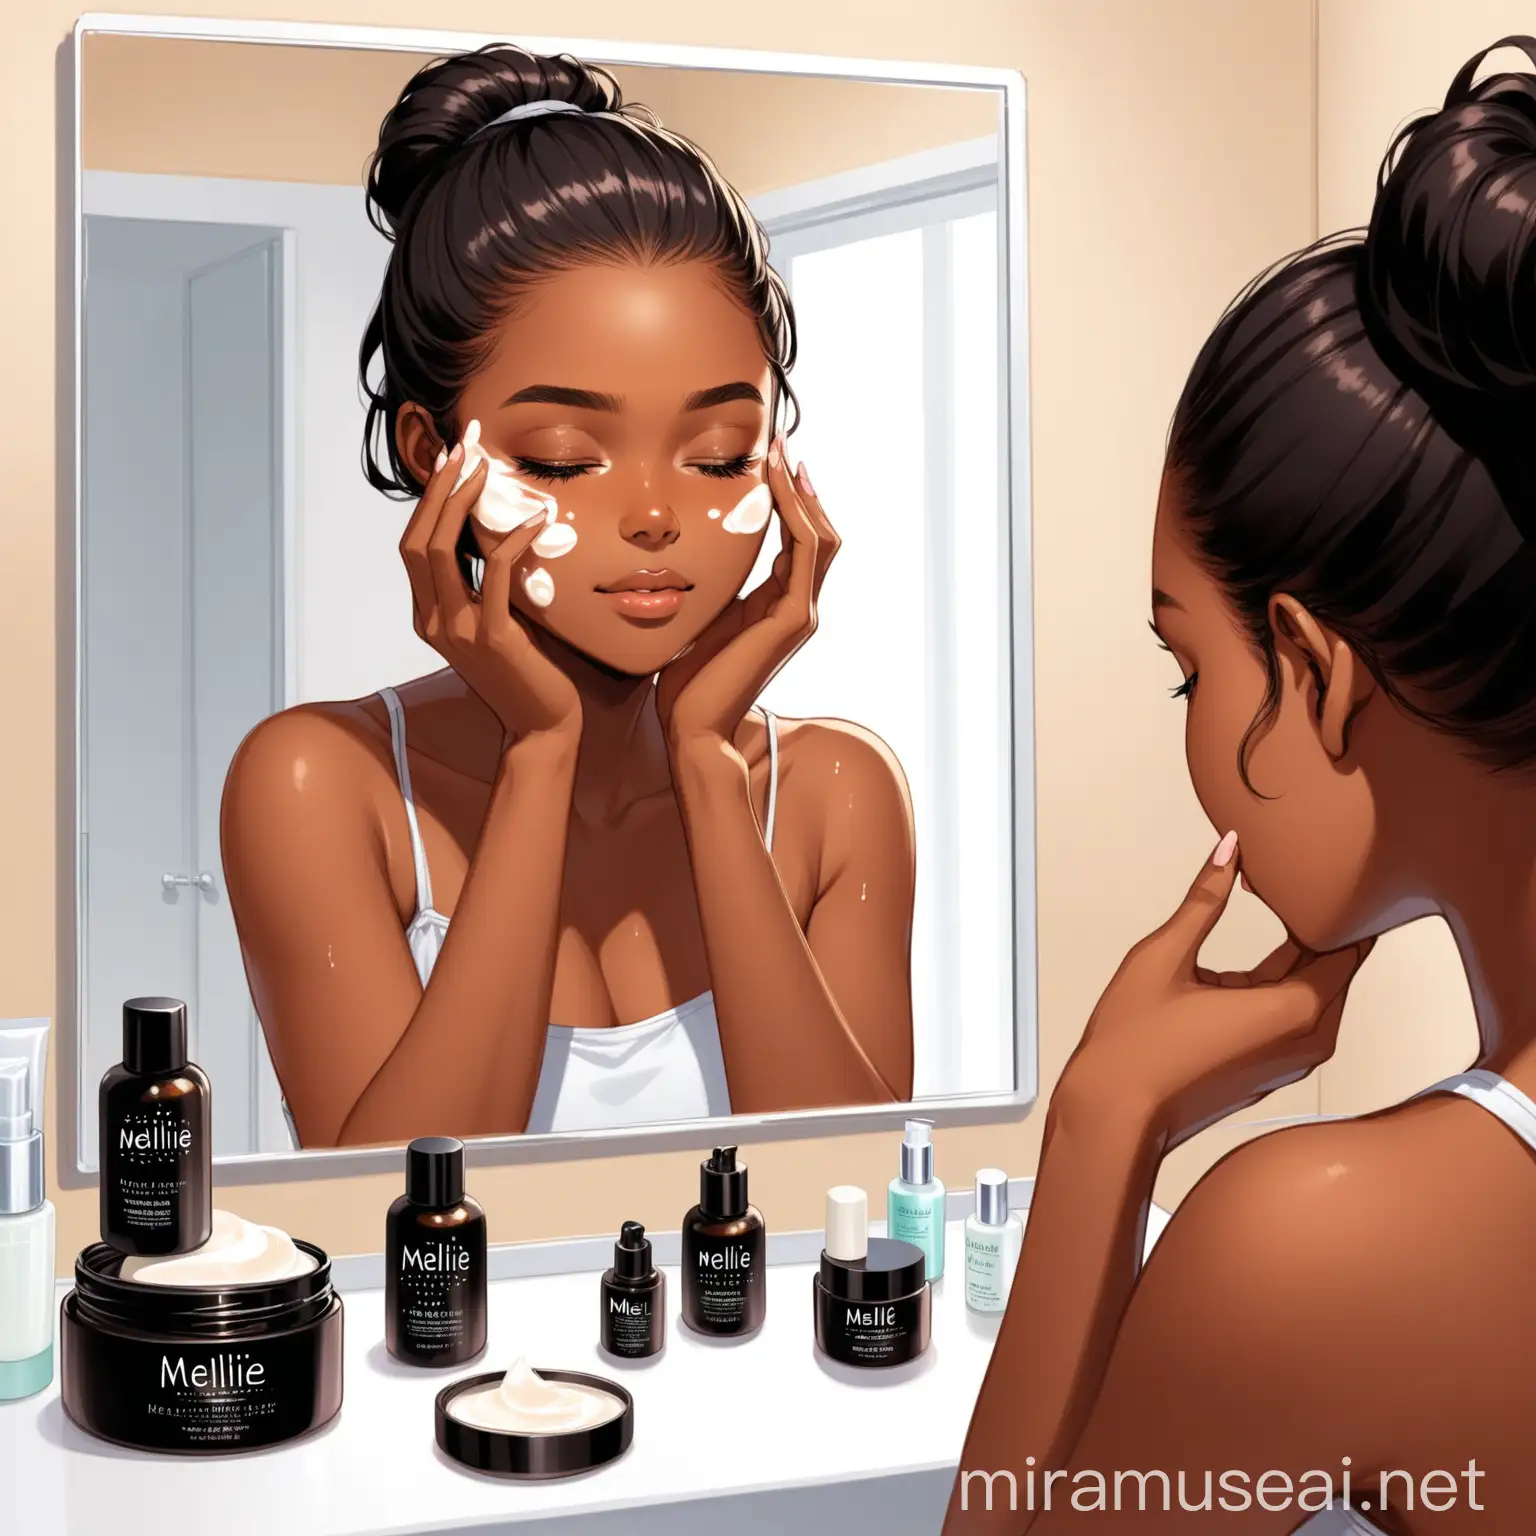 Young Woman Massaging Face with Mellie Bior Moisturizer in Makeup Room